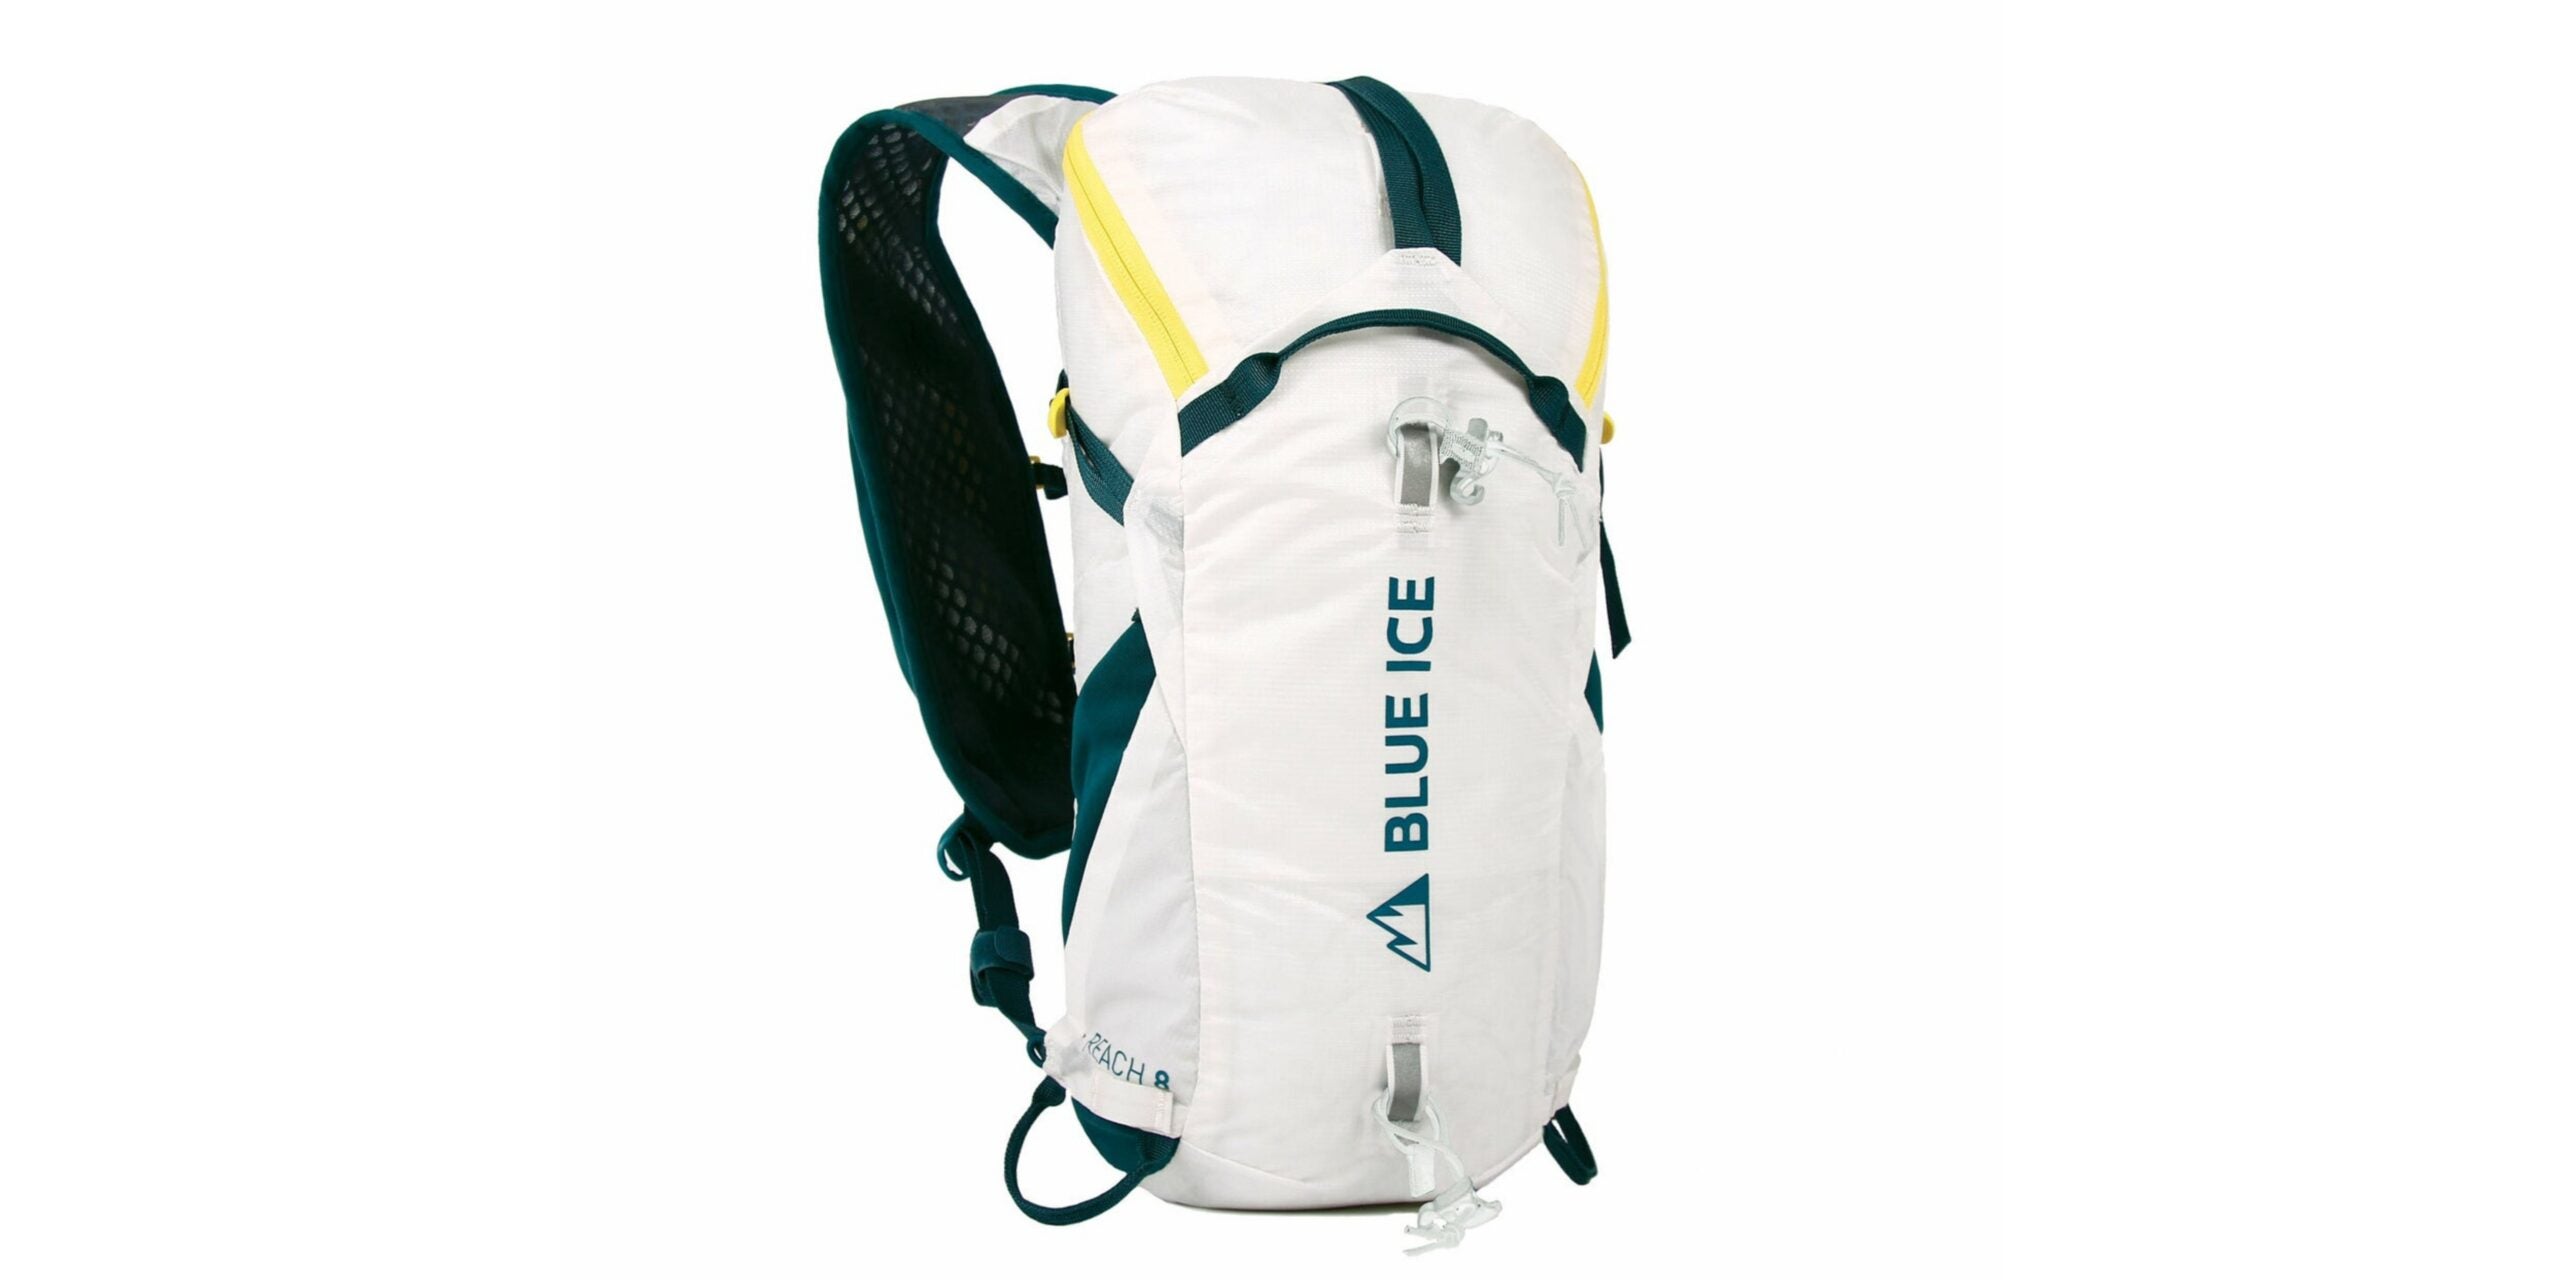 Field Tested: Review of Blue Ice Reach 8L Pack - Climbing